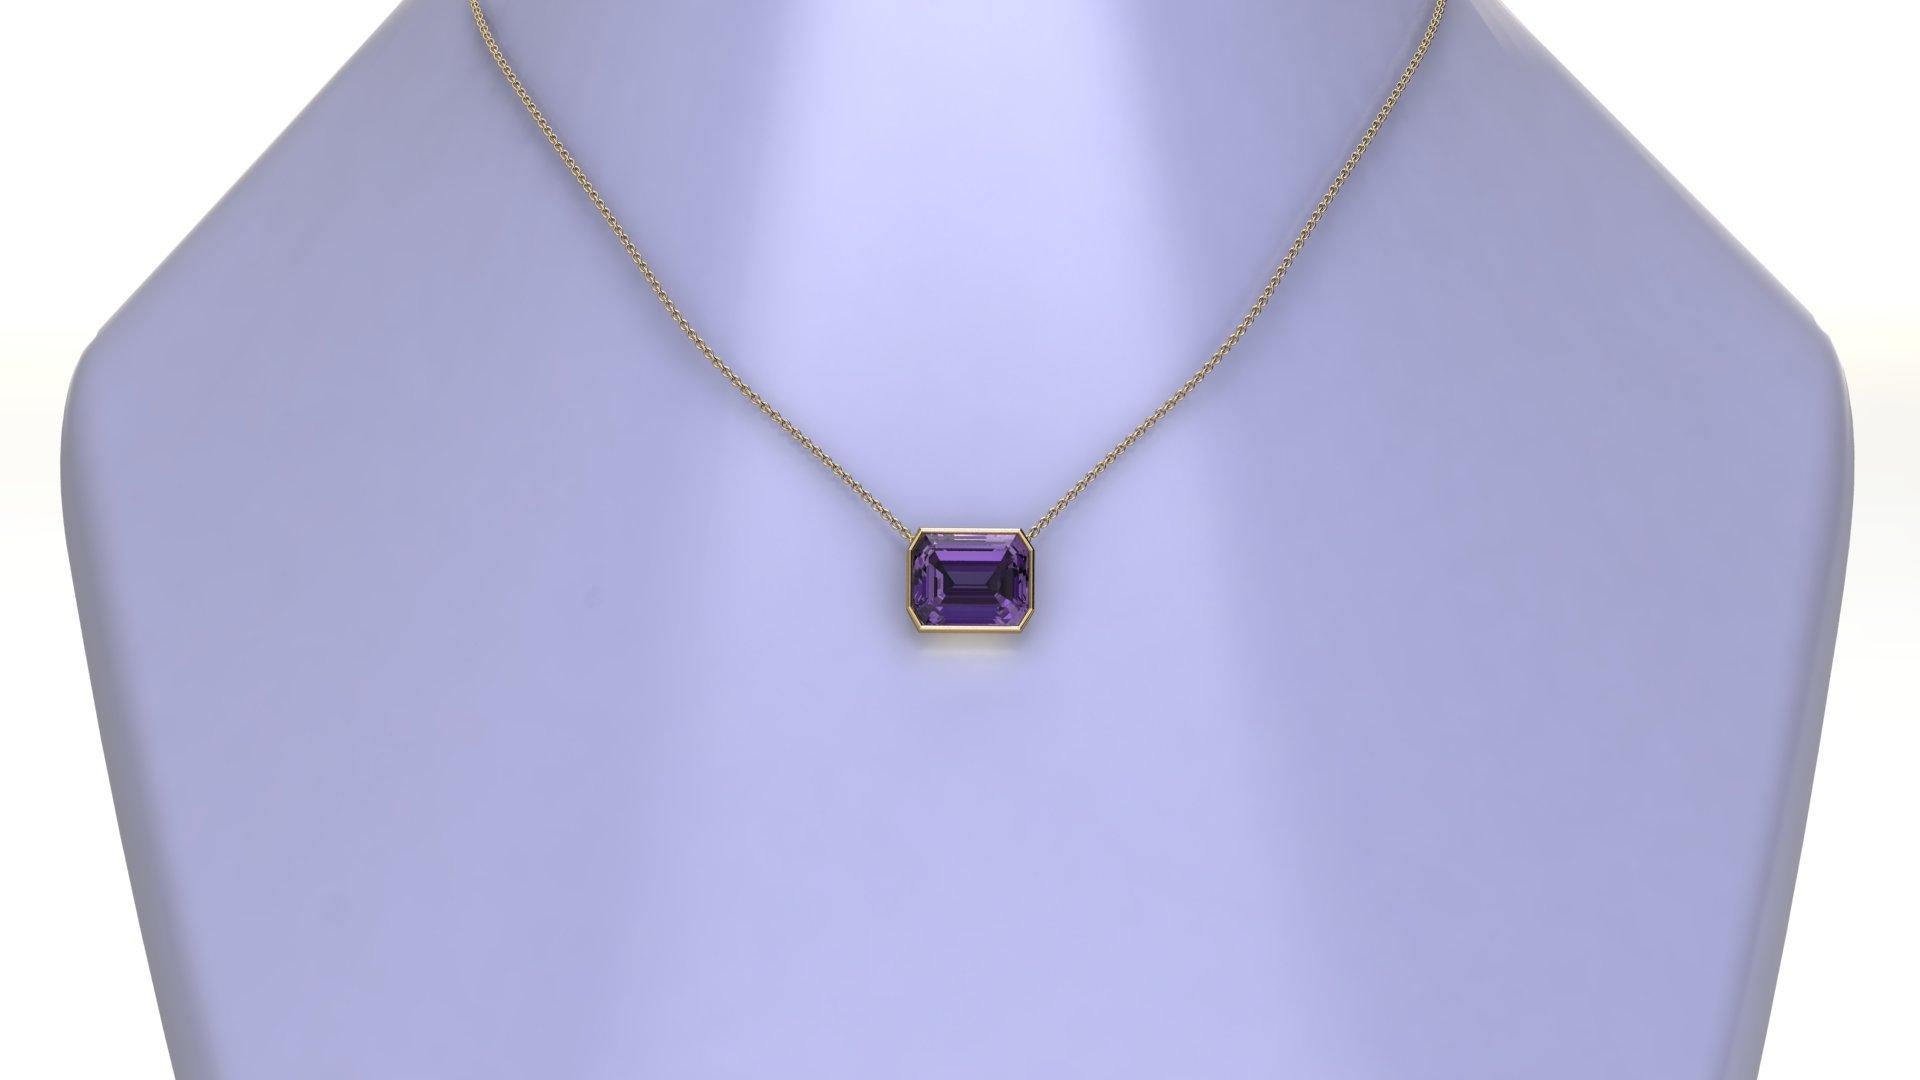 10 Carat Emerald Cut Amethyst in 18K Yellow Gold Thin Bezel Necklace Pendant In New Condition For Sale In New York, NY